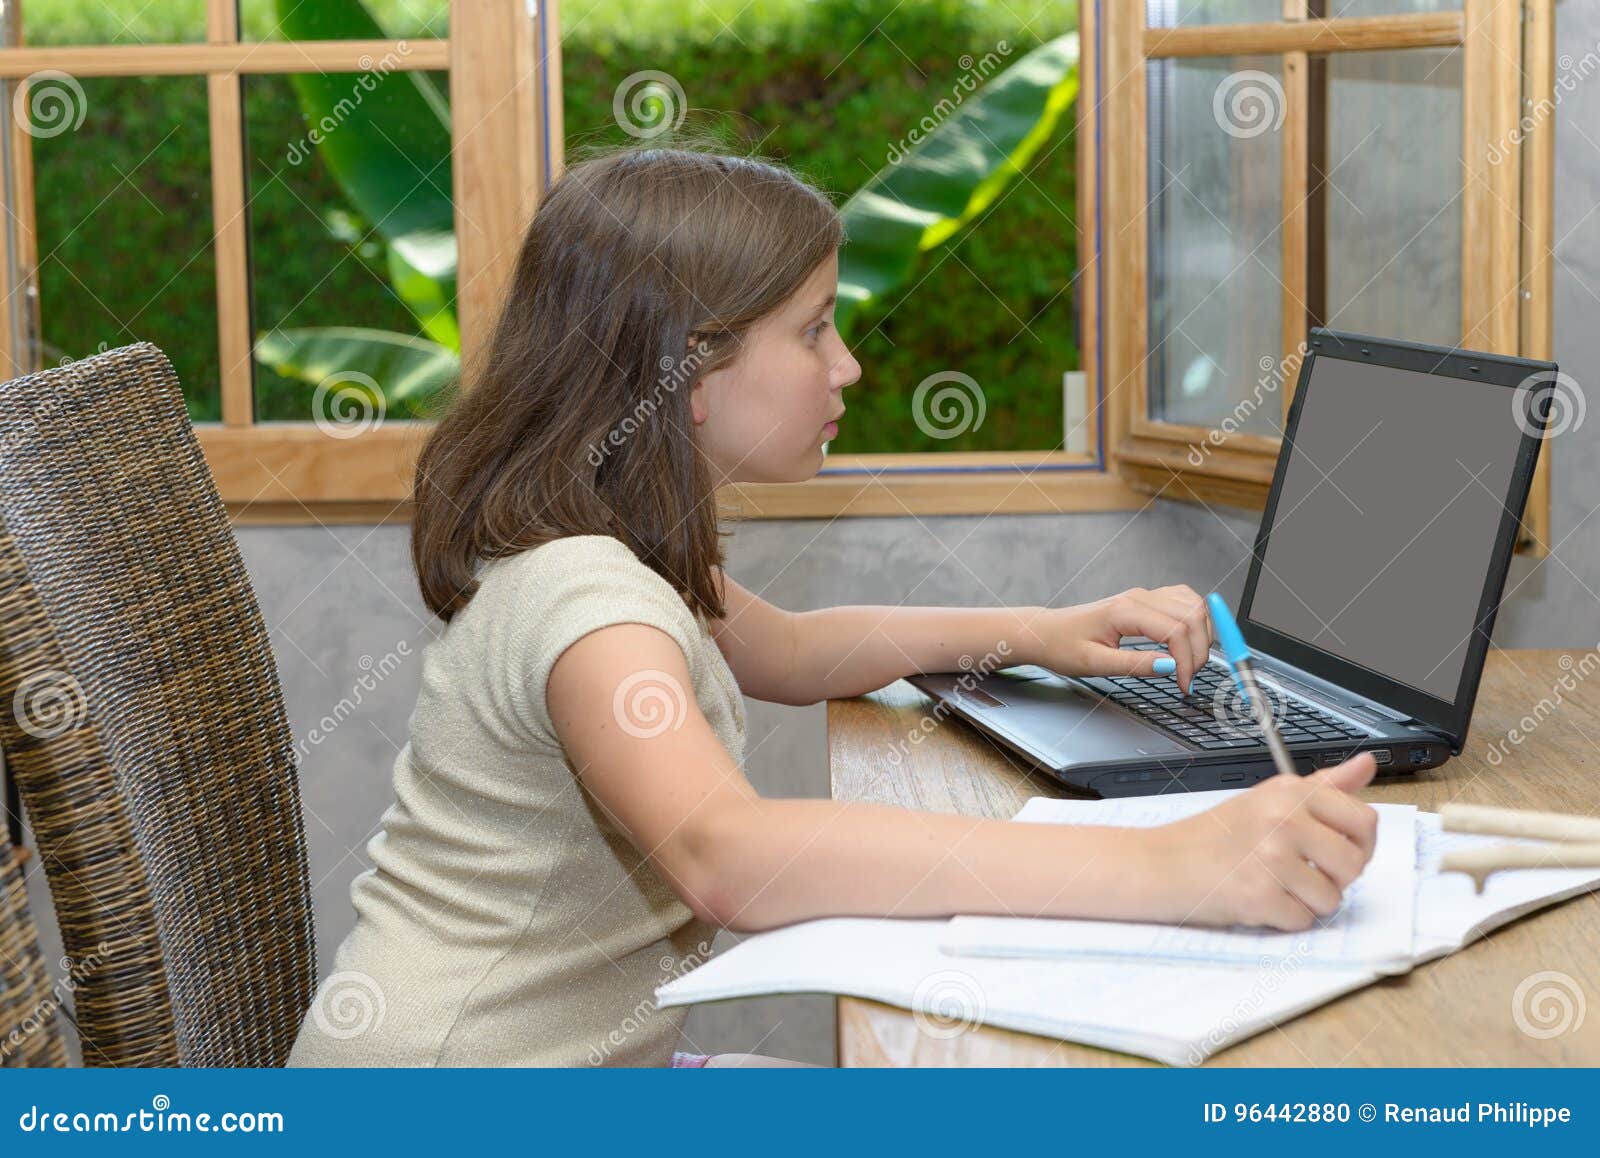 Two Girls Doing Their Homework Royalty Free Stock Image 